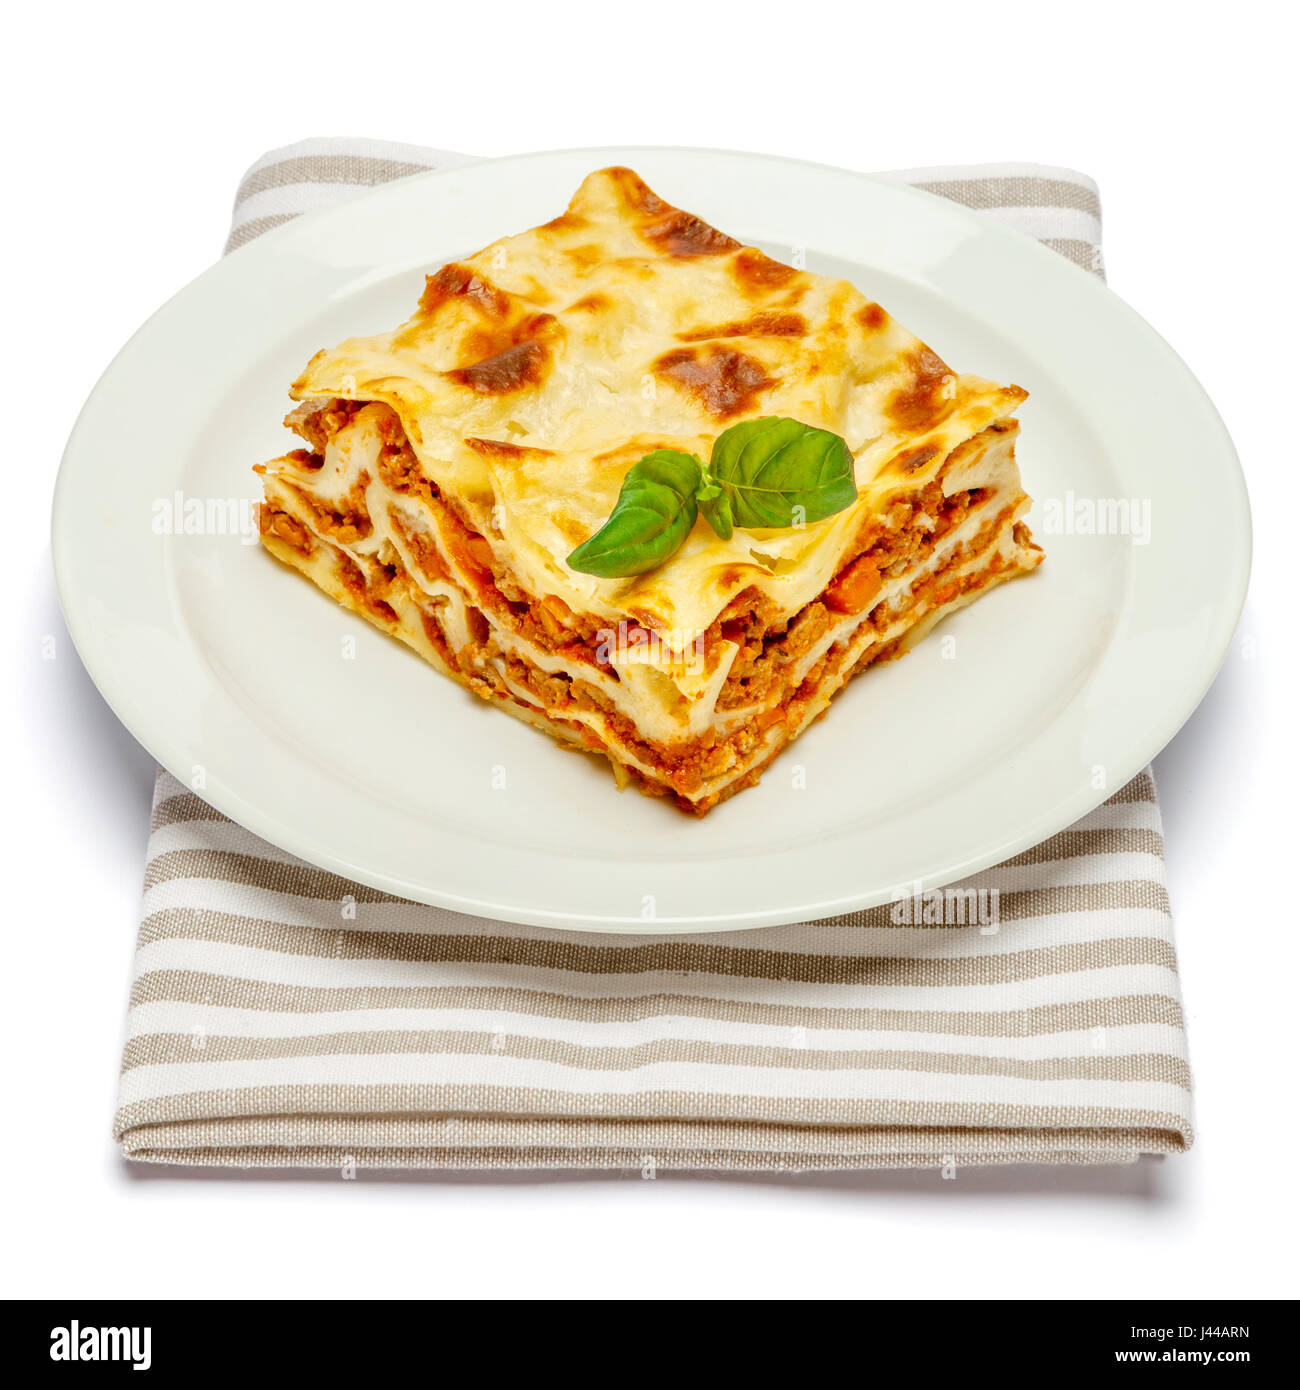 Home made lasagna on a spatula in a house in Seattle, WA Stock Photo - Alamy